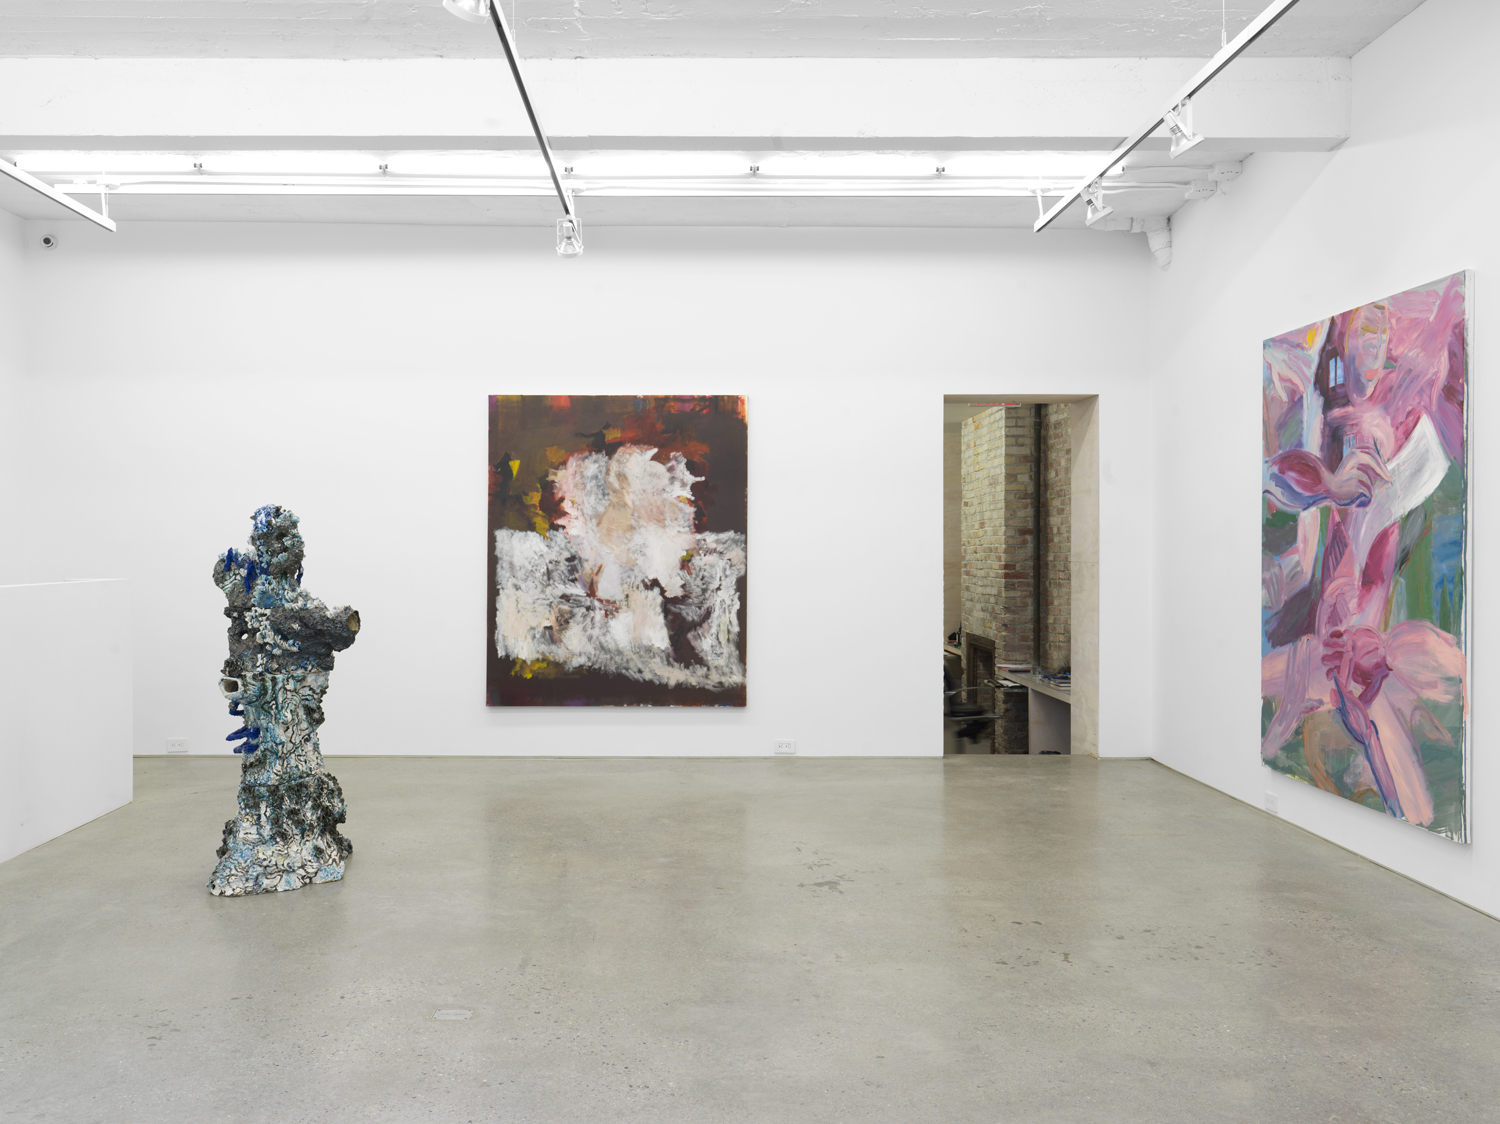 Installation view, Earthly Coil, Magenta Plains, New York, NY, 2021.